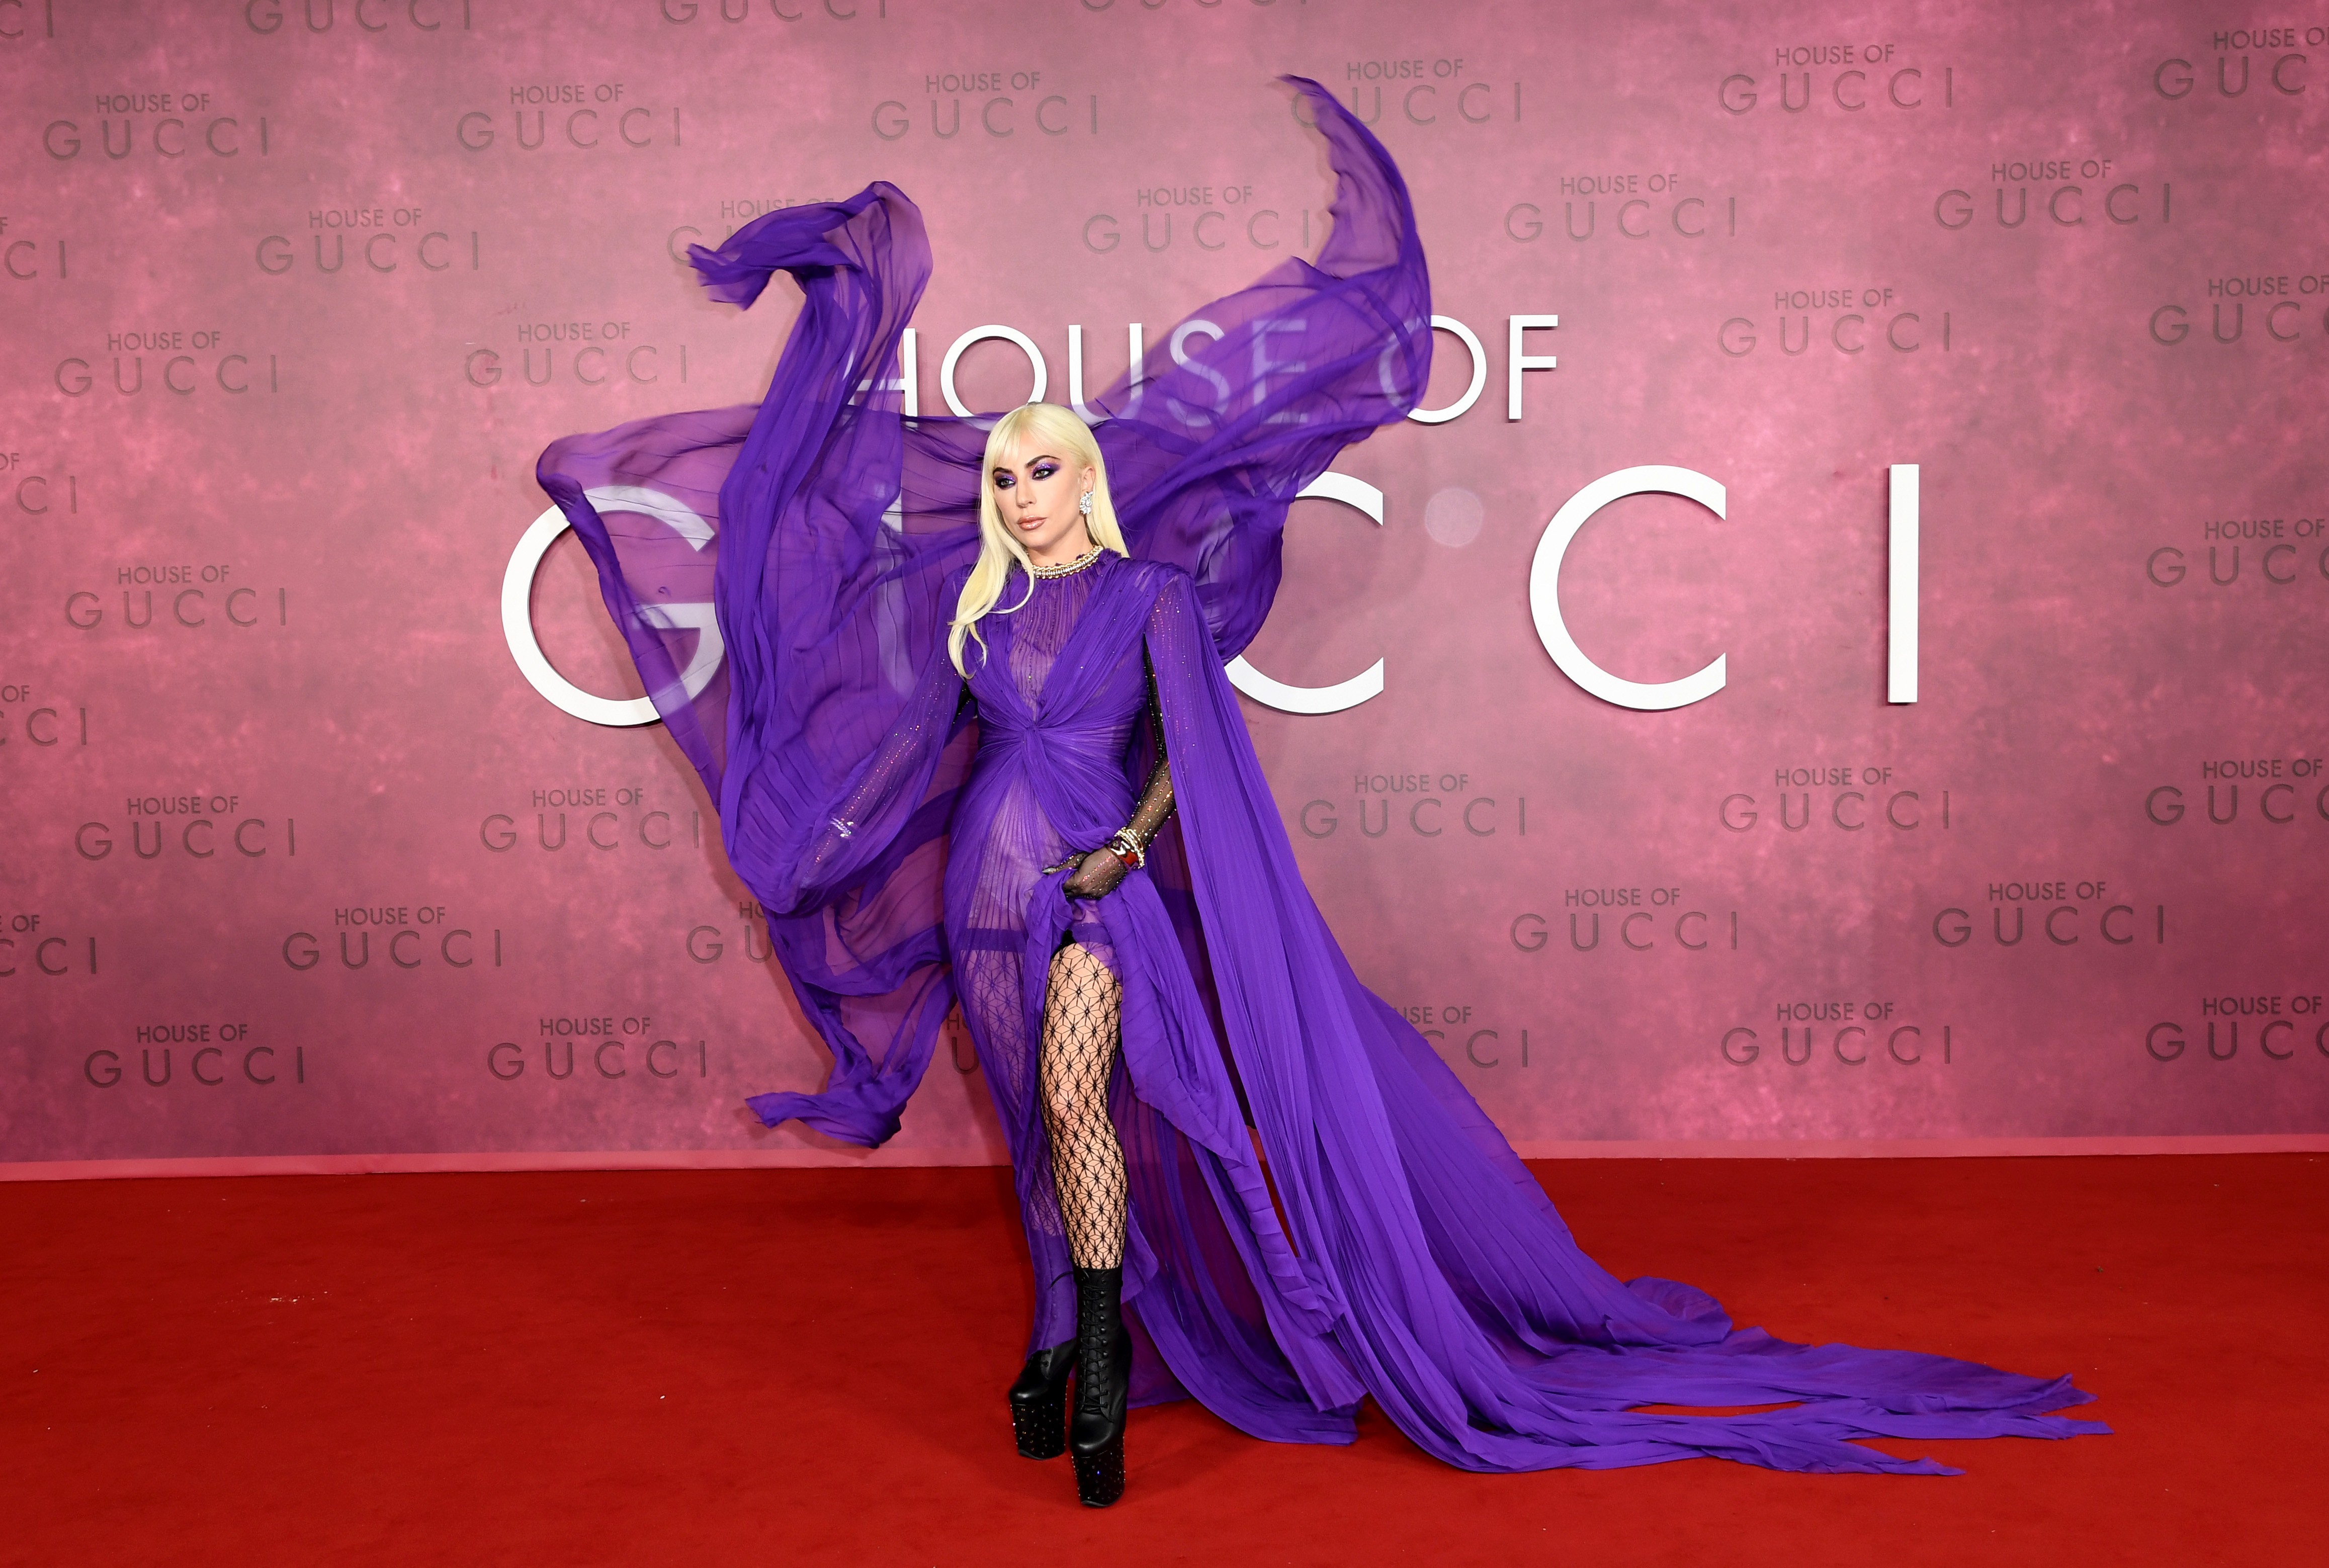 LONDON, ENGLAND - NOVEMBER 09:  Lady Gaga attends the UK Premiere Of "House of Gucci" at Odeon Luxe Leicester Square on November 09, 2021 in London, England. (Photo by Gareth Cattermole/Getty Images for Metro-Goldwyn-Mayer Studios and Universal Pictures ) (Foto: Gareth Cattermole/Getty Images f)